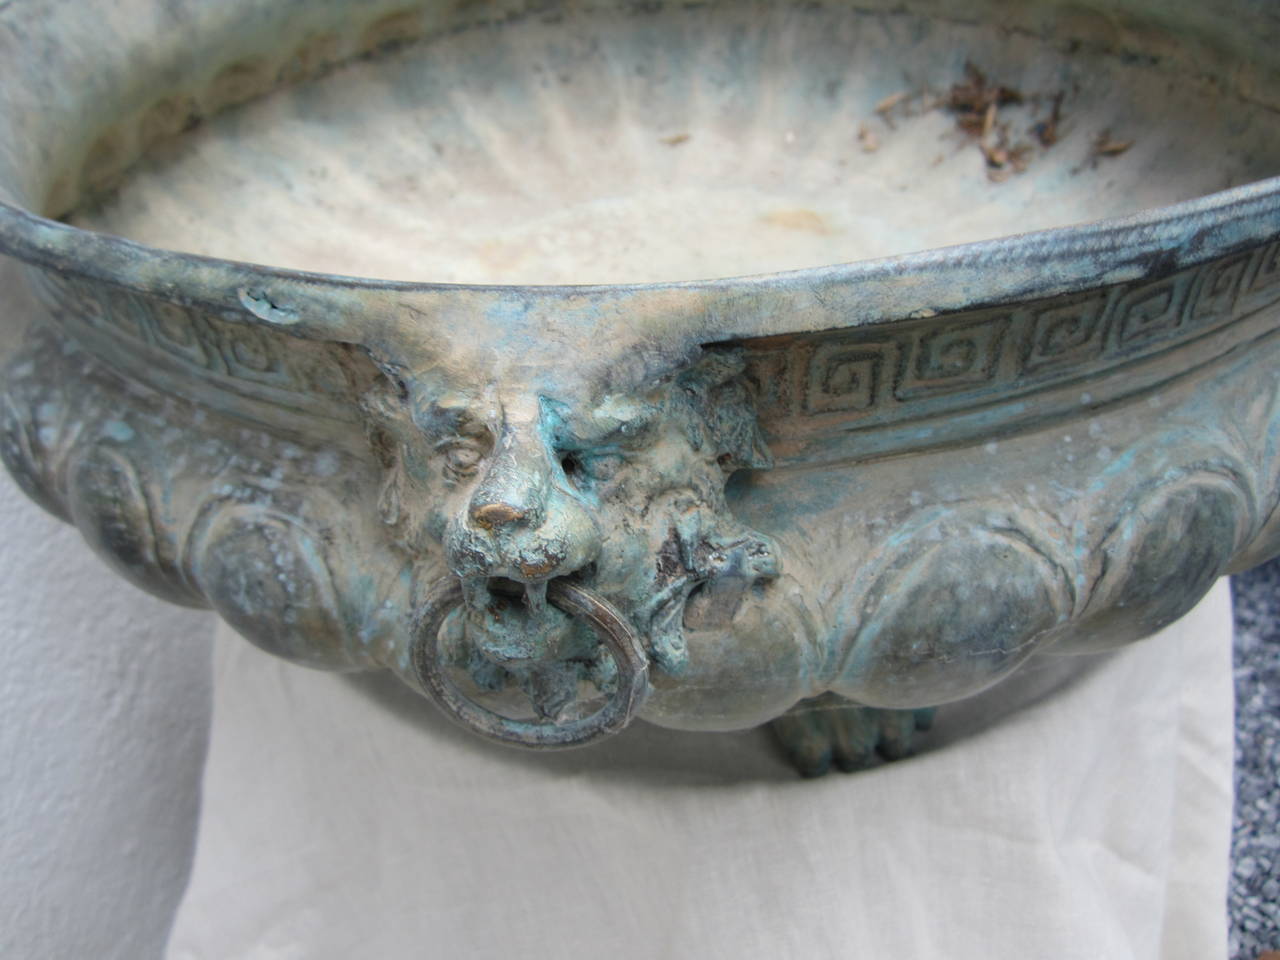 Handsome bronze planter/centrepiece/bowl sitting on four reptile feet with a Greek key border, wonderful green patina.